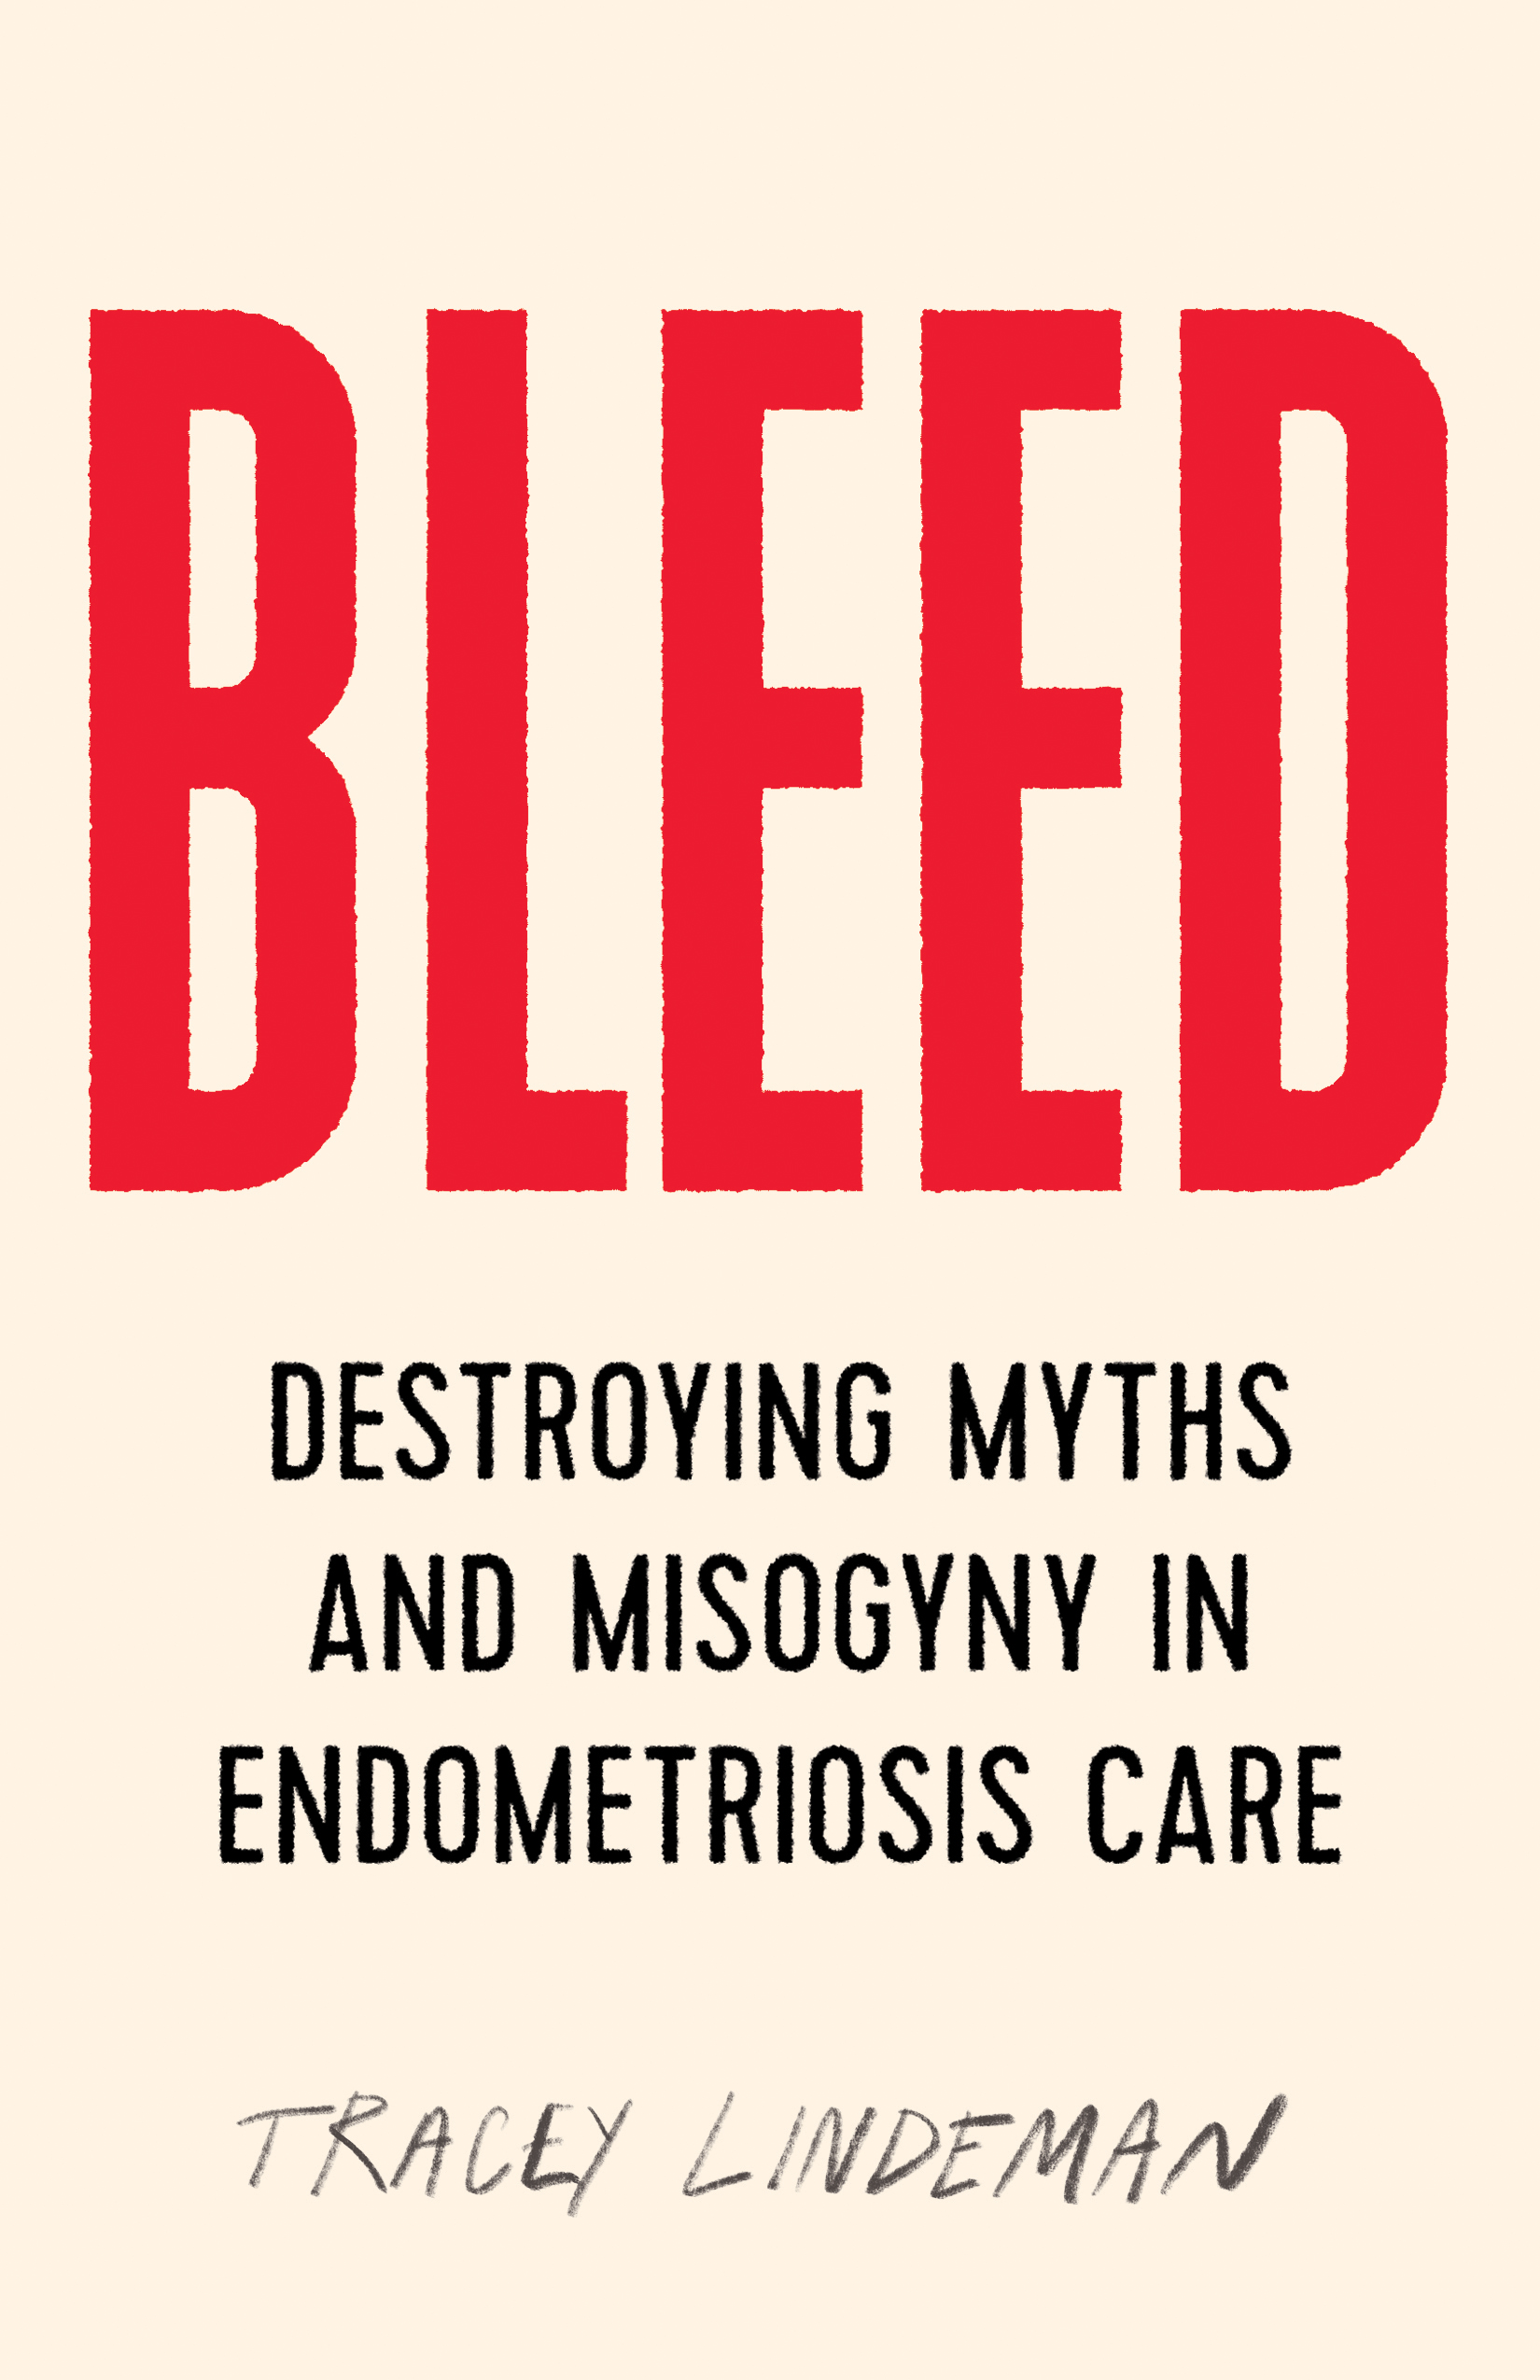 Book cover of Tracey Lindeman's Bleed